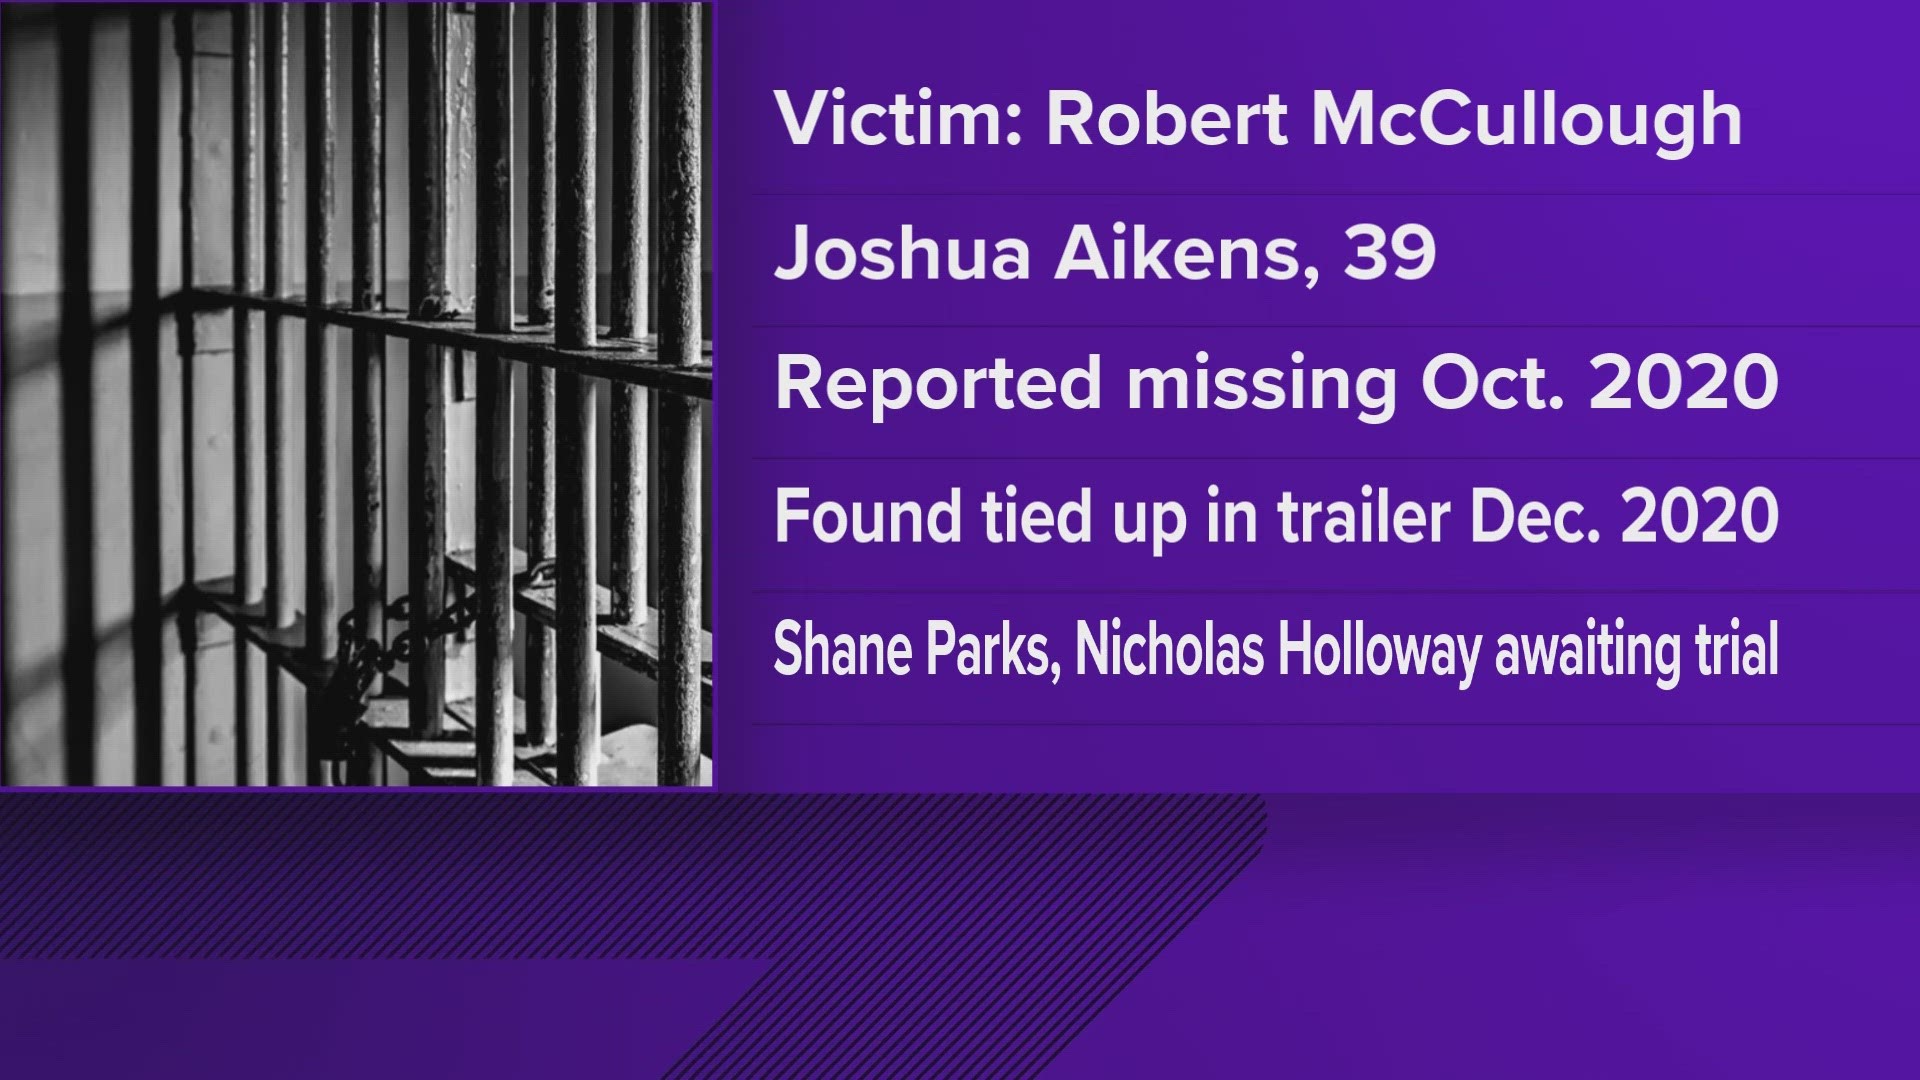 Joshua Aikens, a 39-year-old, killed Robert McCullough in the fall of 2020, according to District Attorney General Russell Johnson.